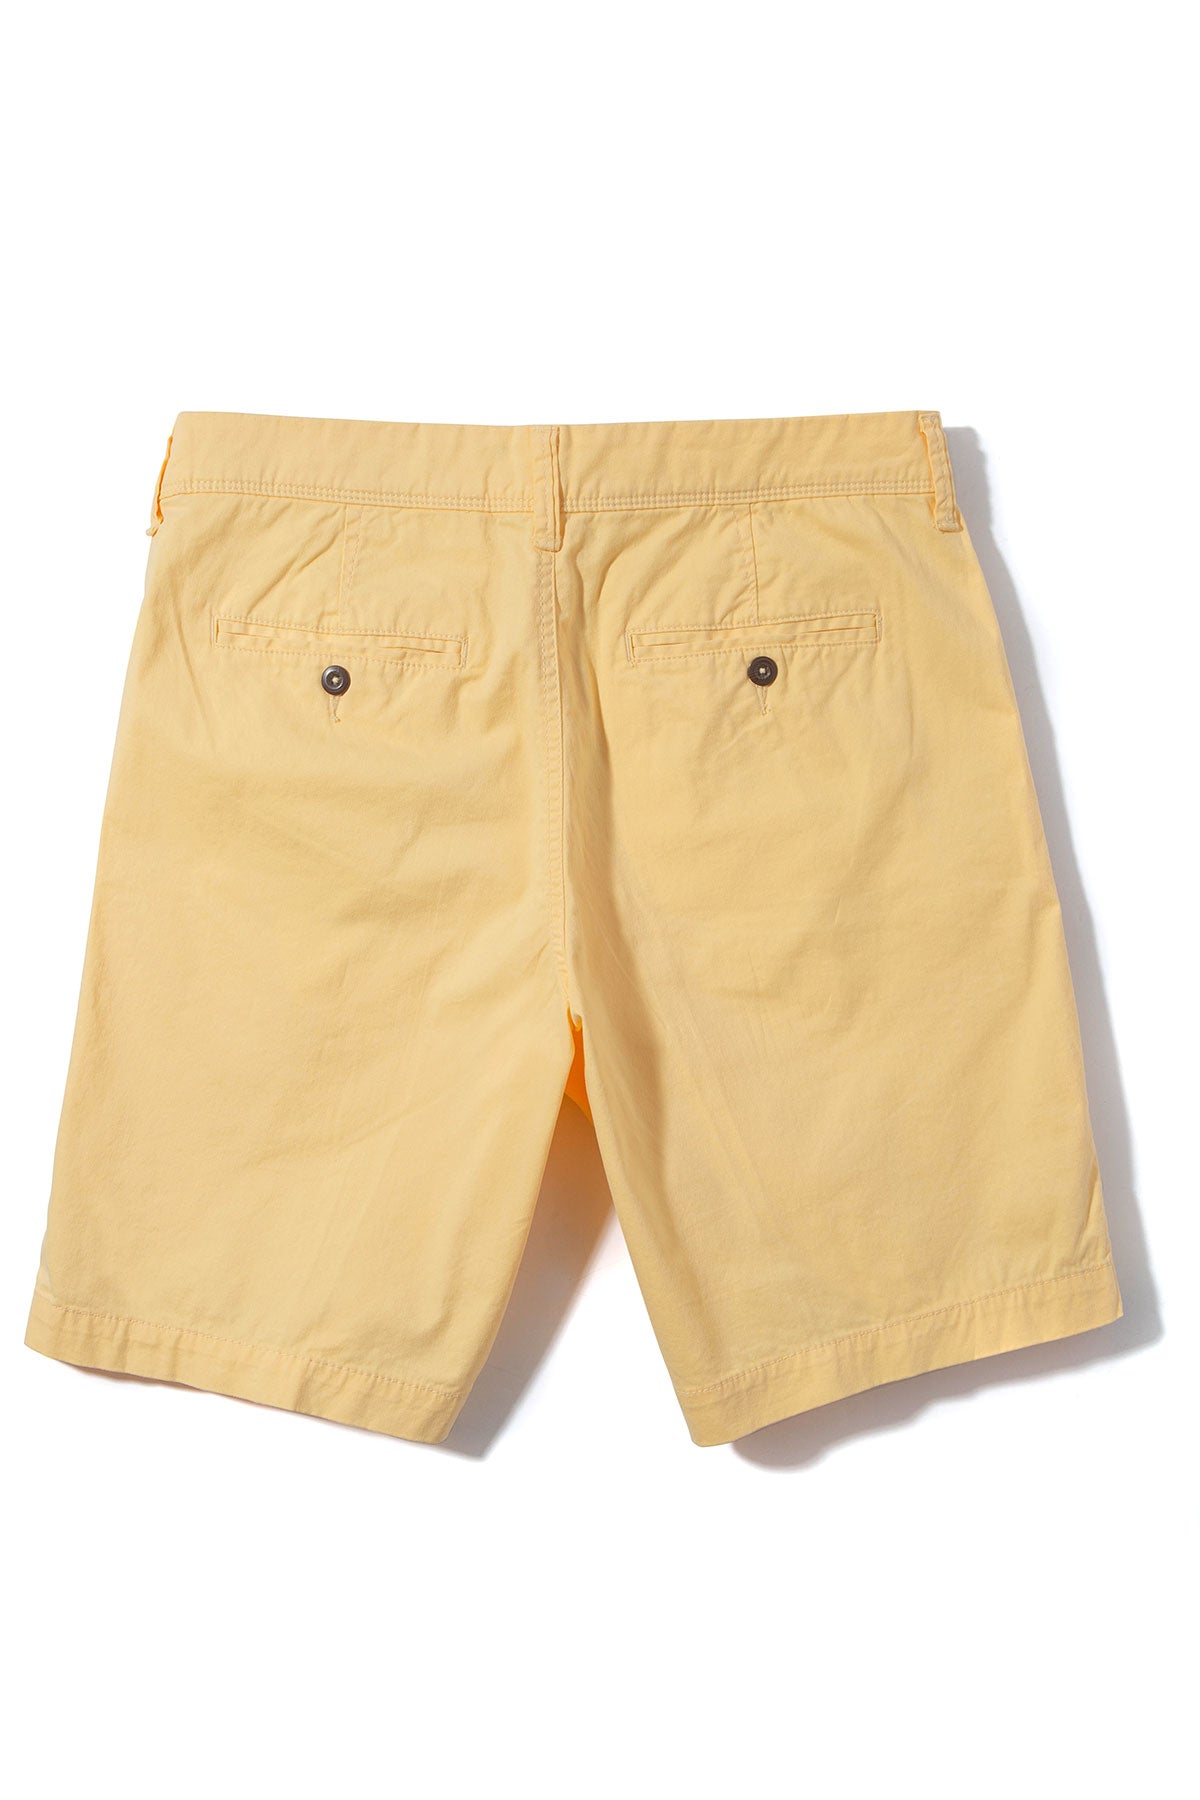 Rockport 9" Stretch Cotton Shorts in Yellow | Mens - Shorts | Georg Roth